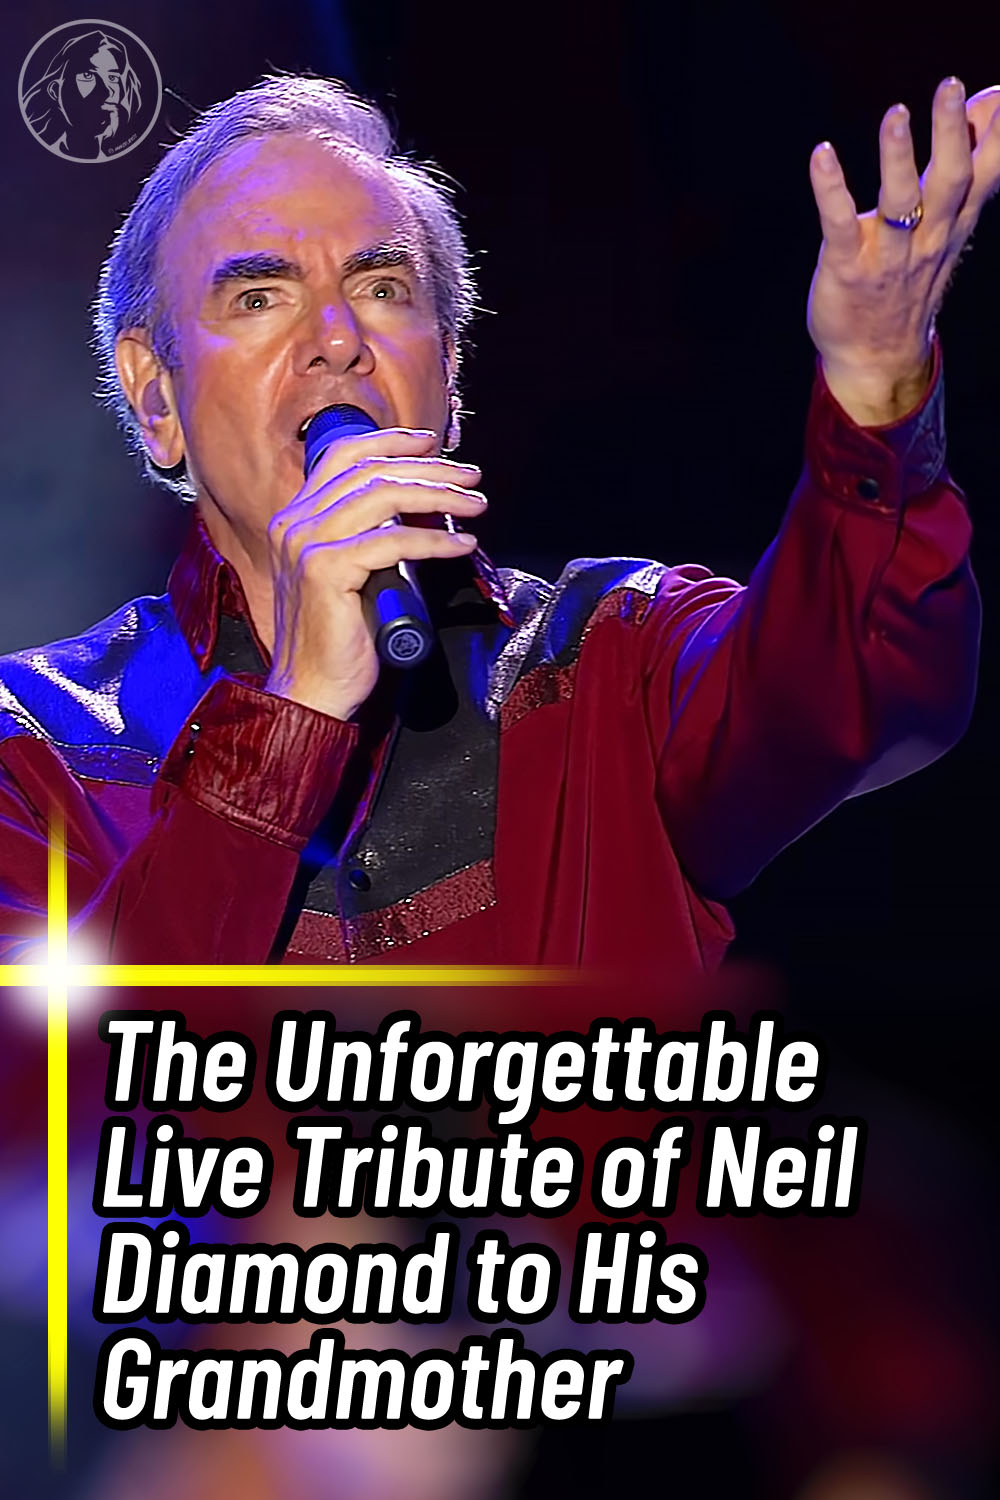 The Unforgettable Live Tribute of Neil Diamond to His Grandmother